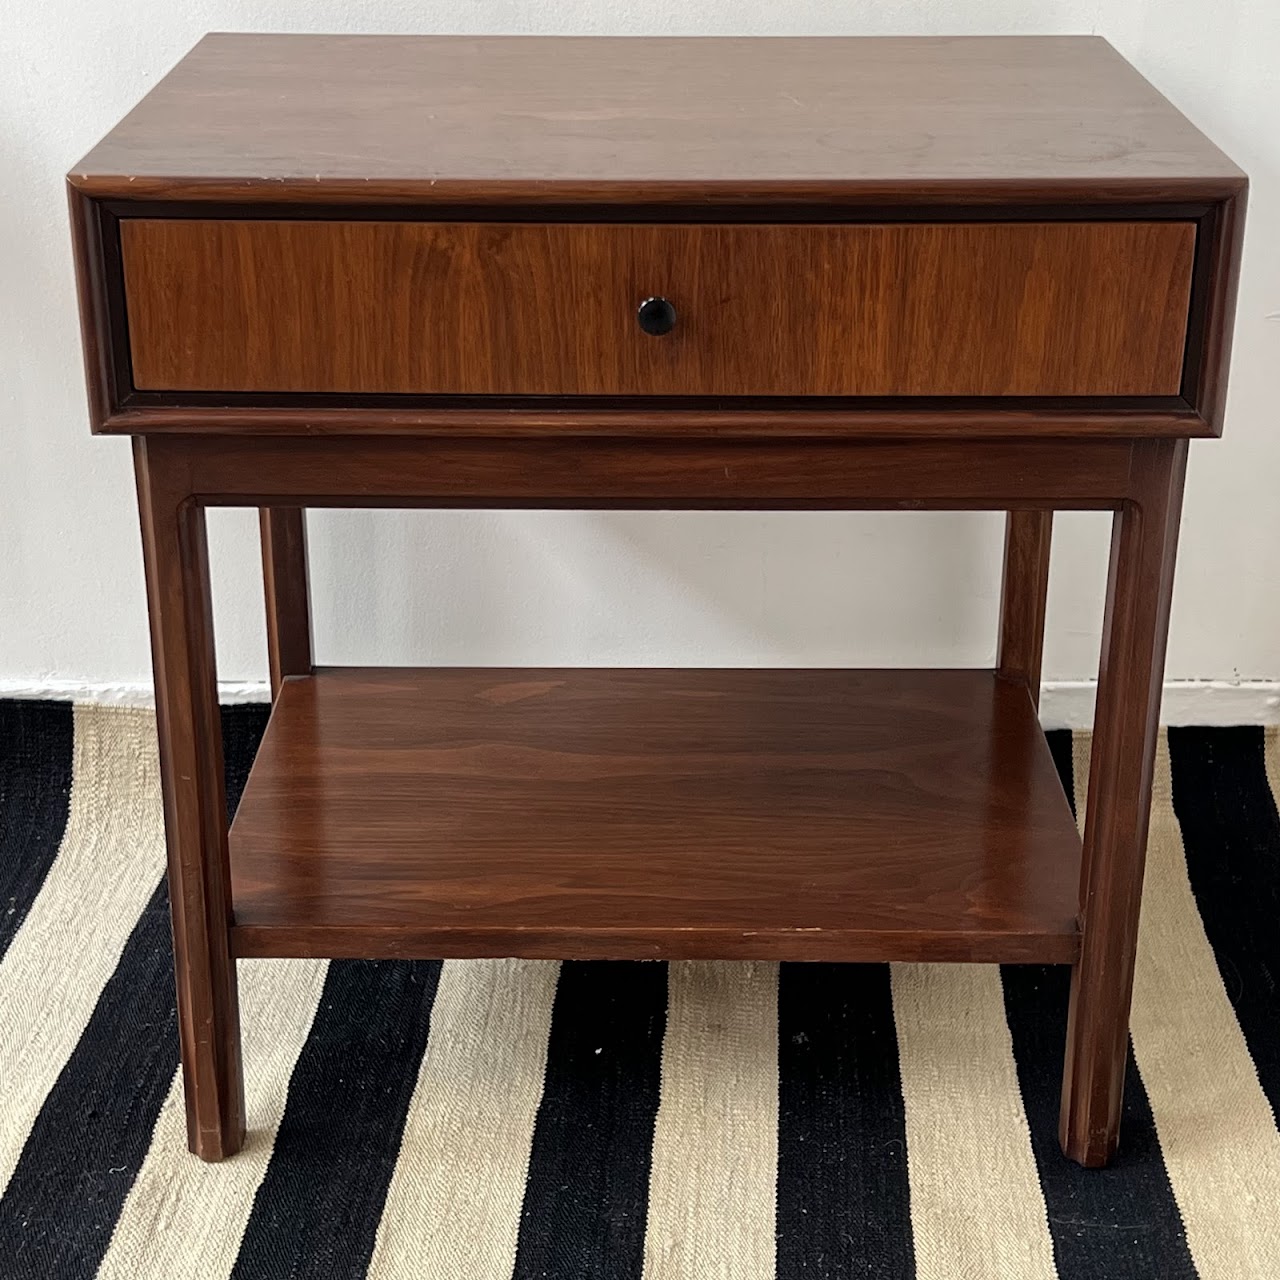 Jack Cartwright for Founders Mid-Century Walnut Side Table